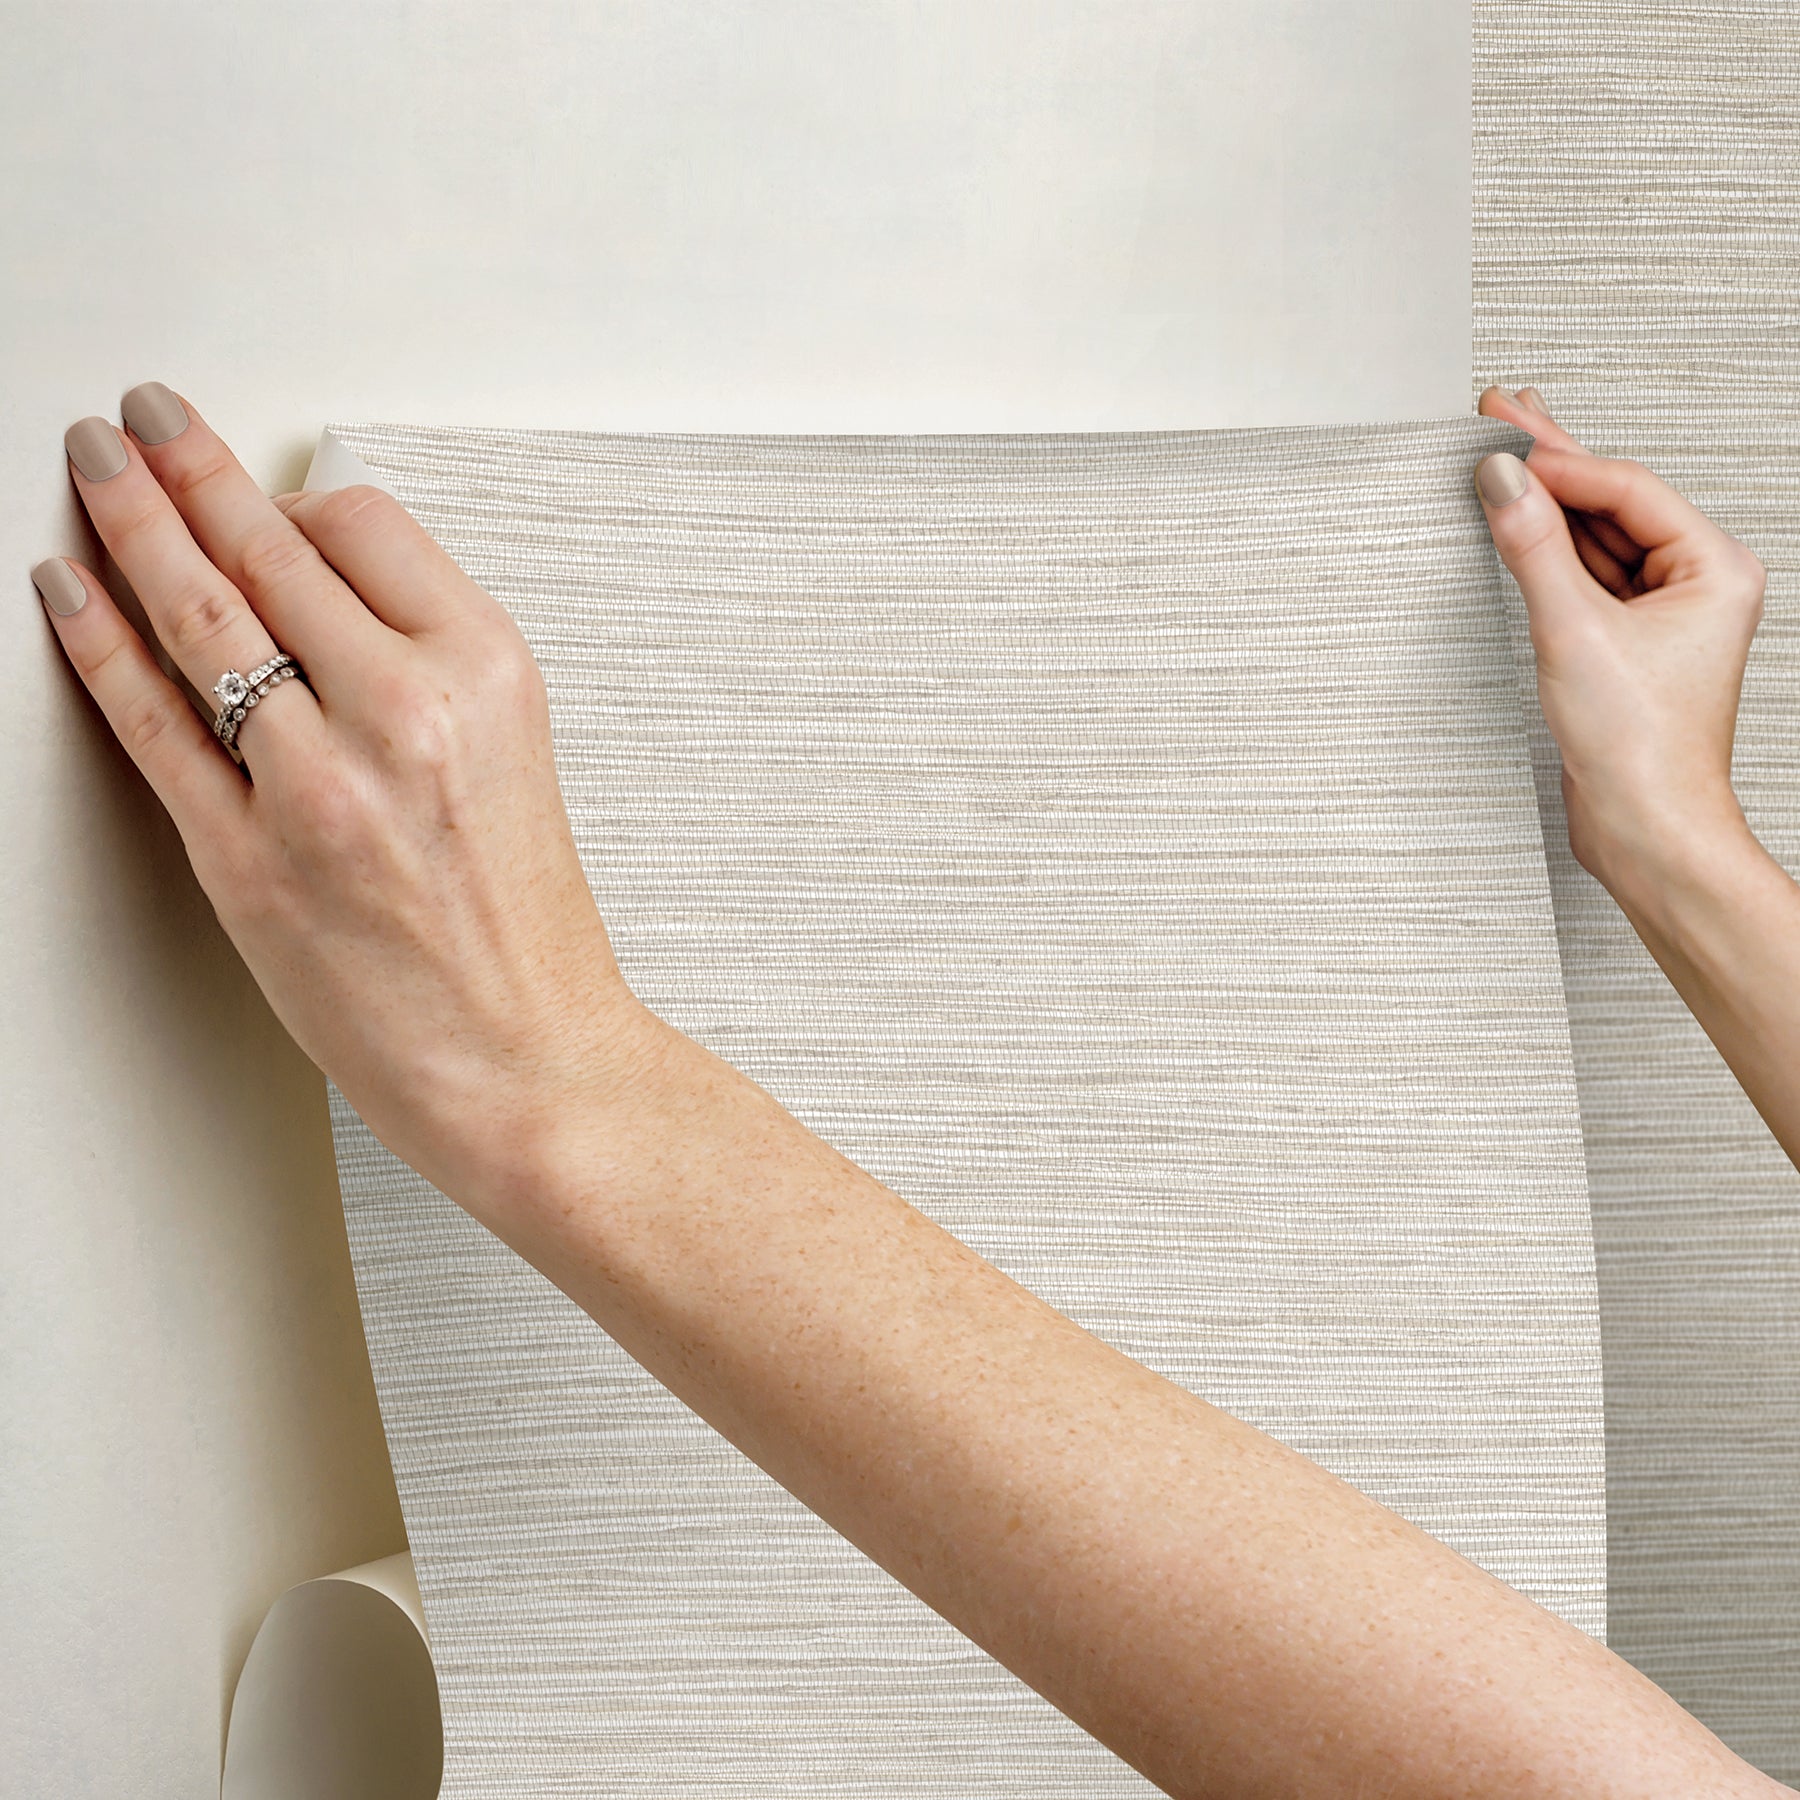 Dimensional Grasscloth Peel and Stick Wallpaper Peel and Stick Wallpaper RoomMates   